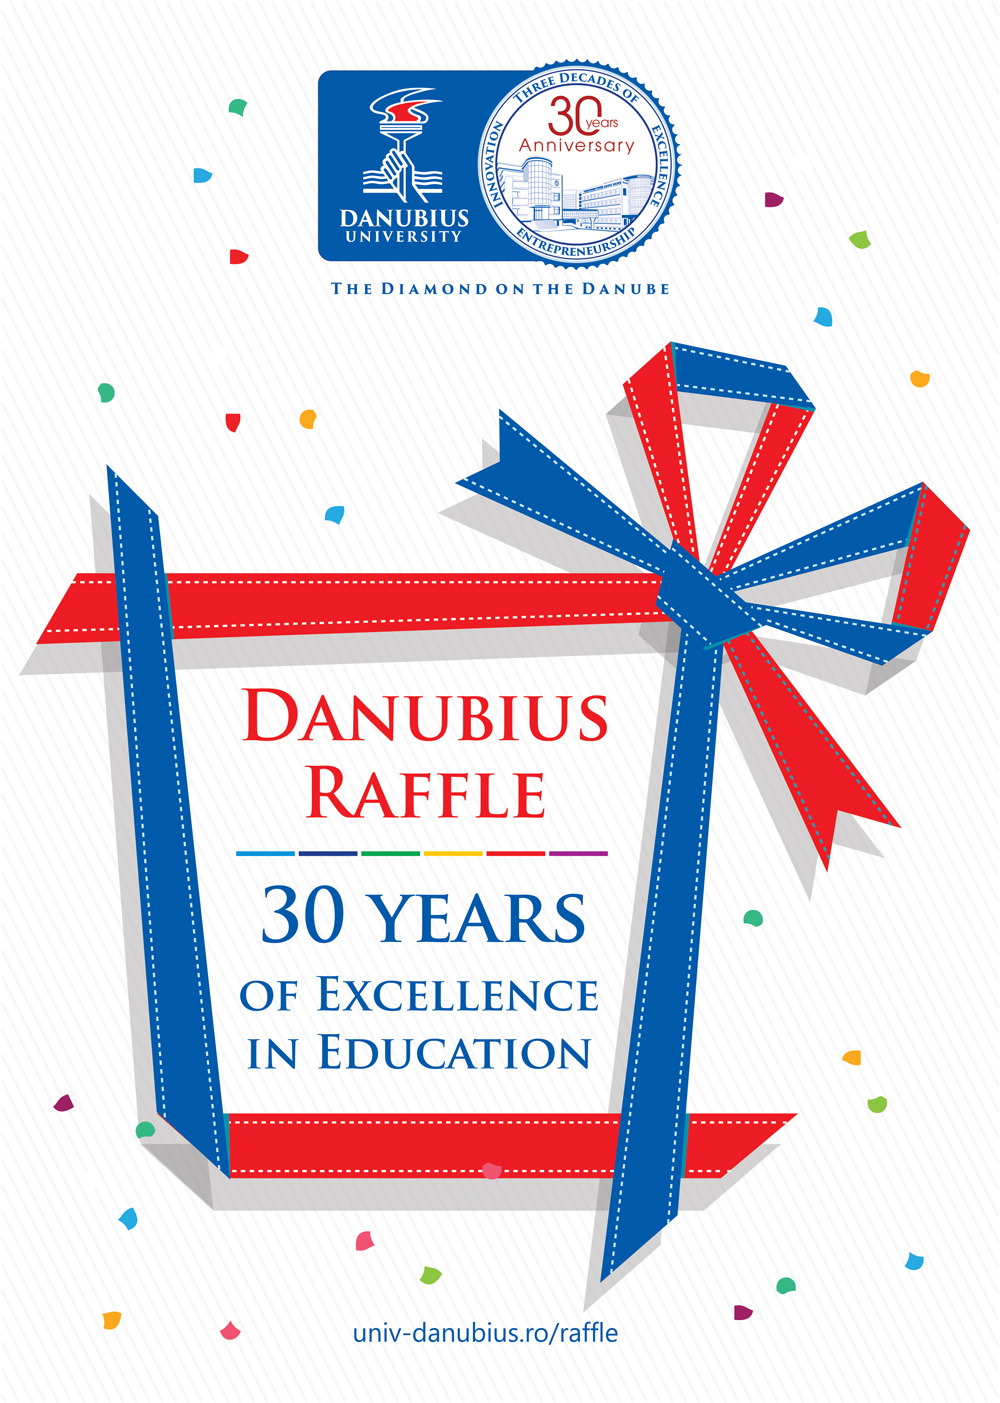 First prize of the “DANUBIUS RAFFLE, 30 YEARS OF EXCELLENCE IN EDUCATION”